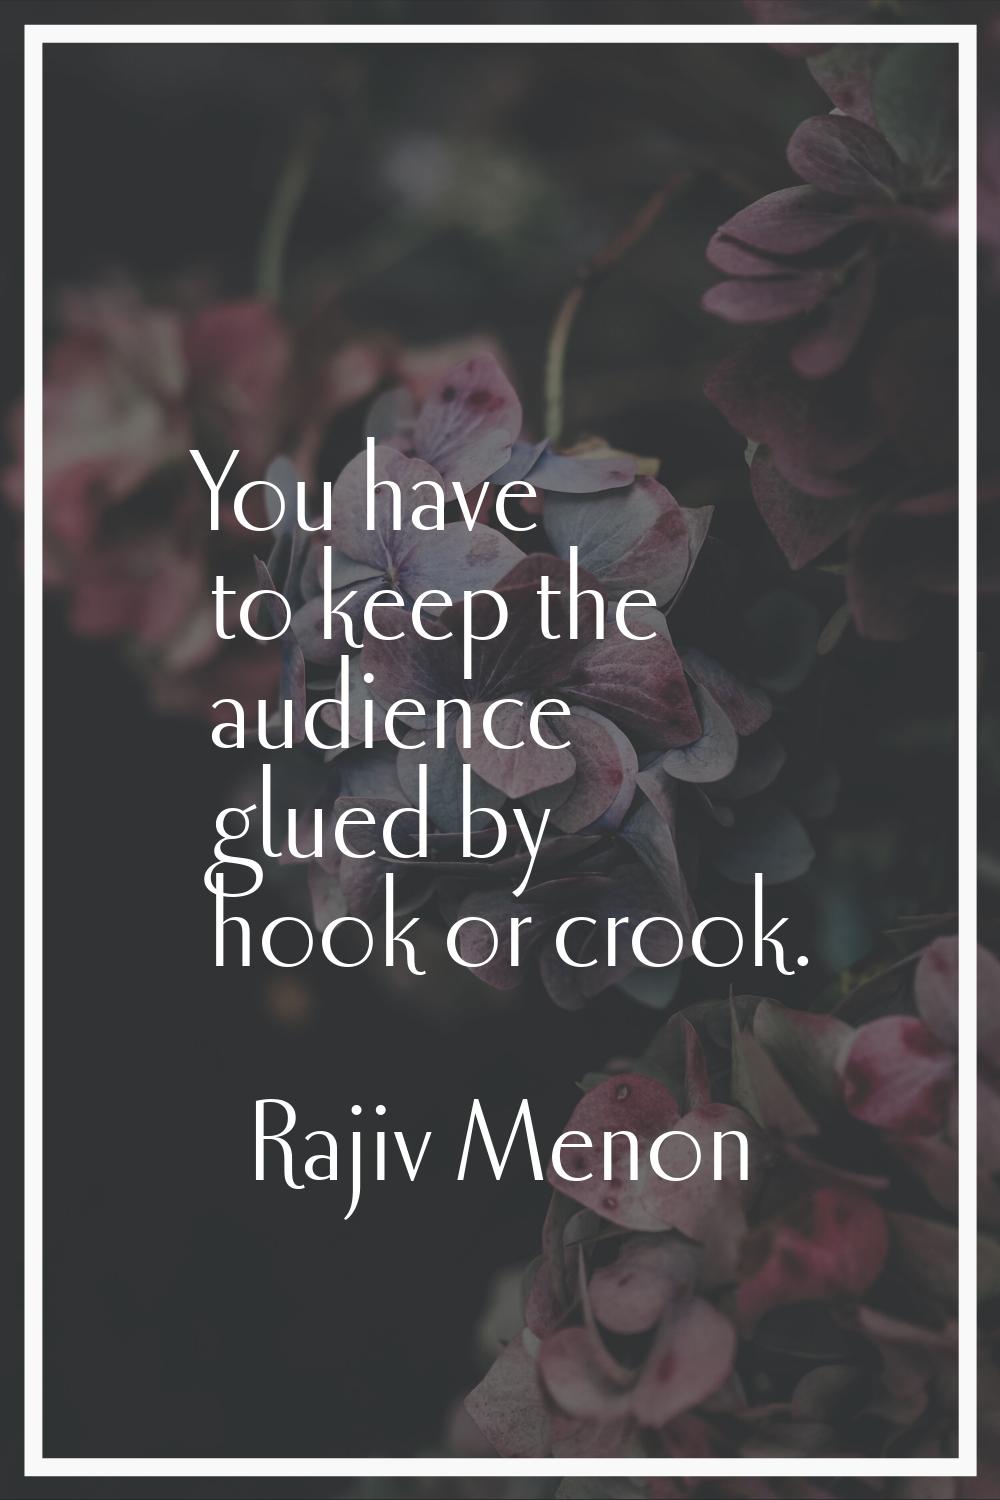 You have to keep the audience glued by hook or crook.